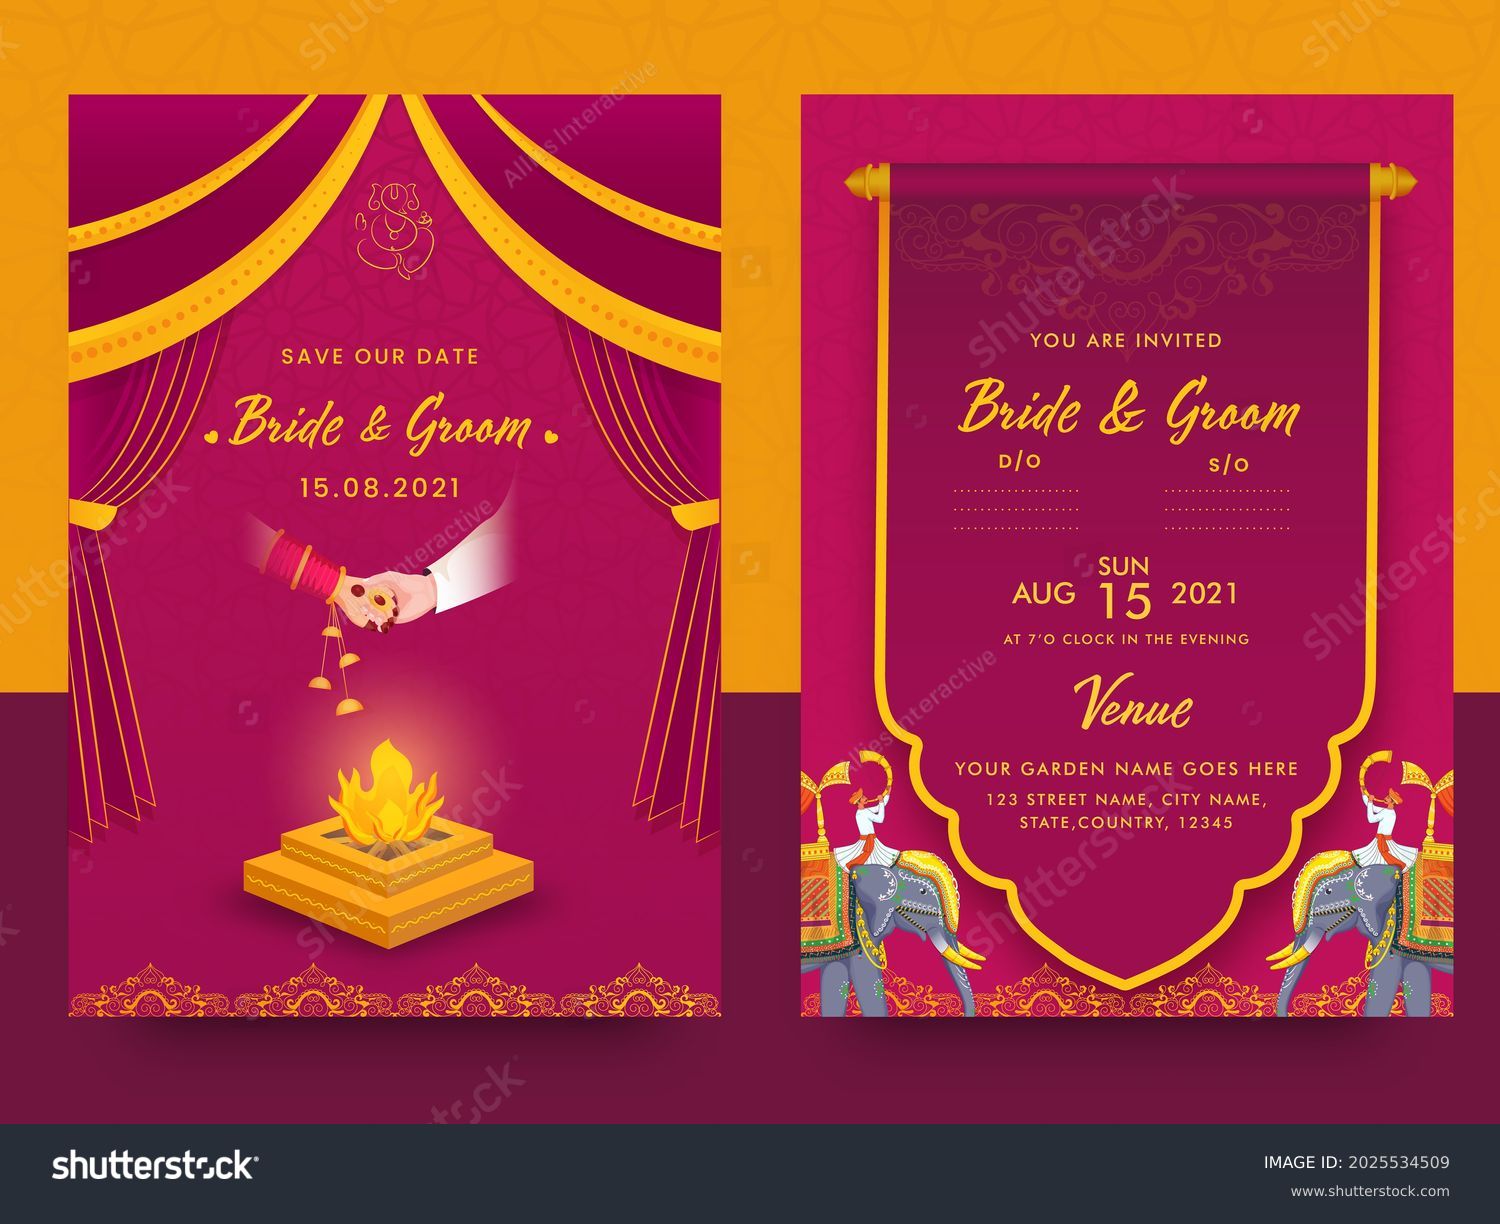 Indian Wedding Card Template With Fire Pit (Agnikund) In Pink And Orange Color. #2025534509